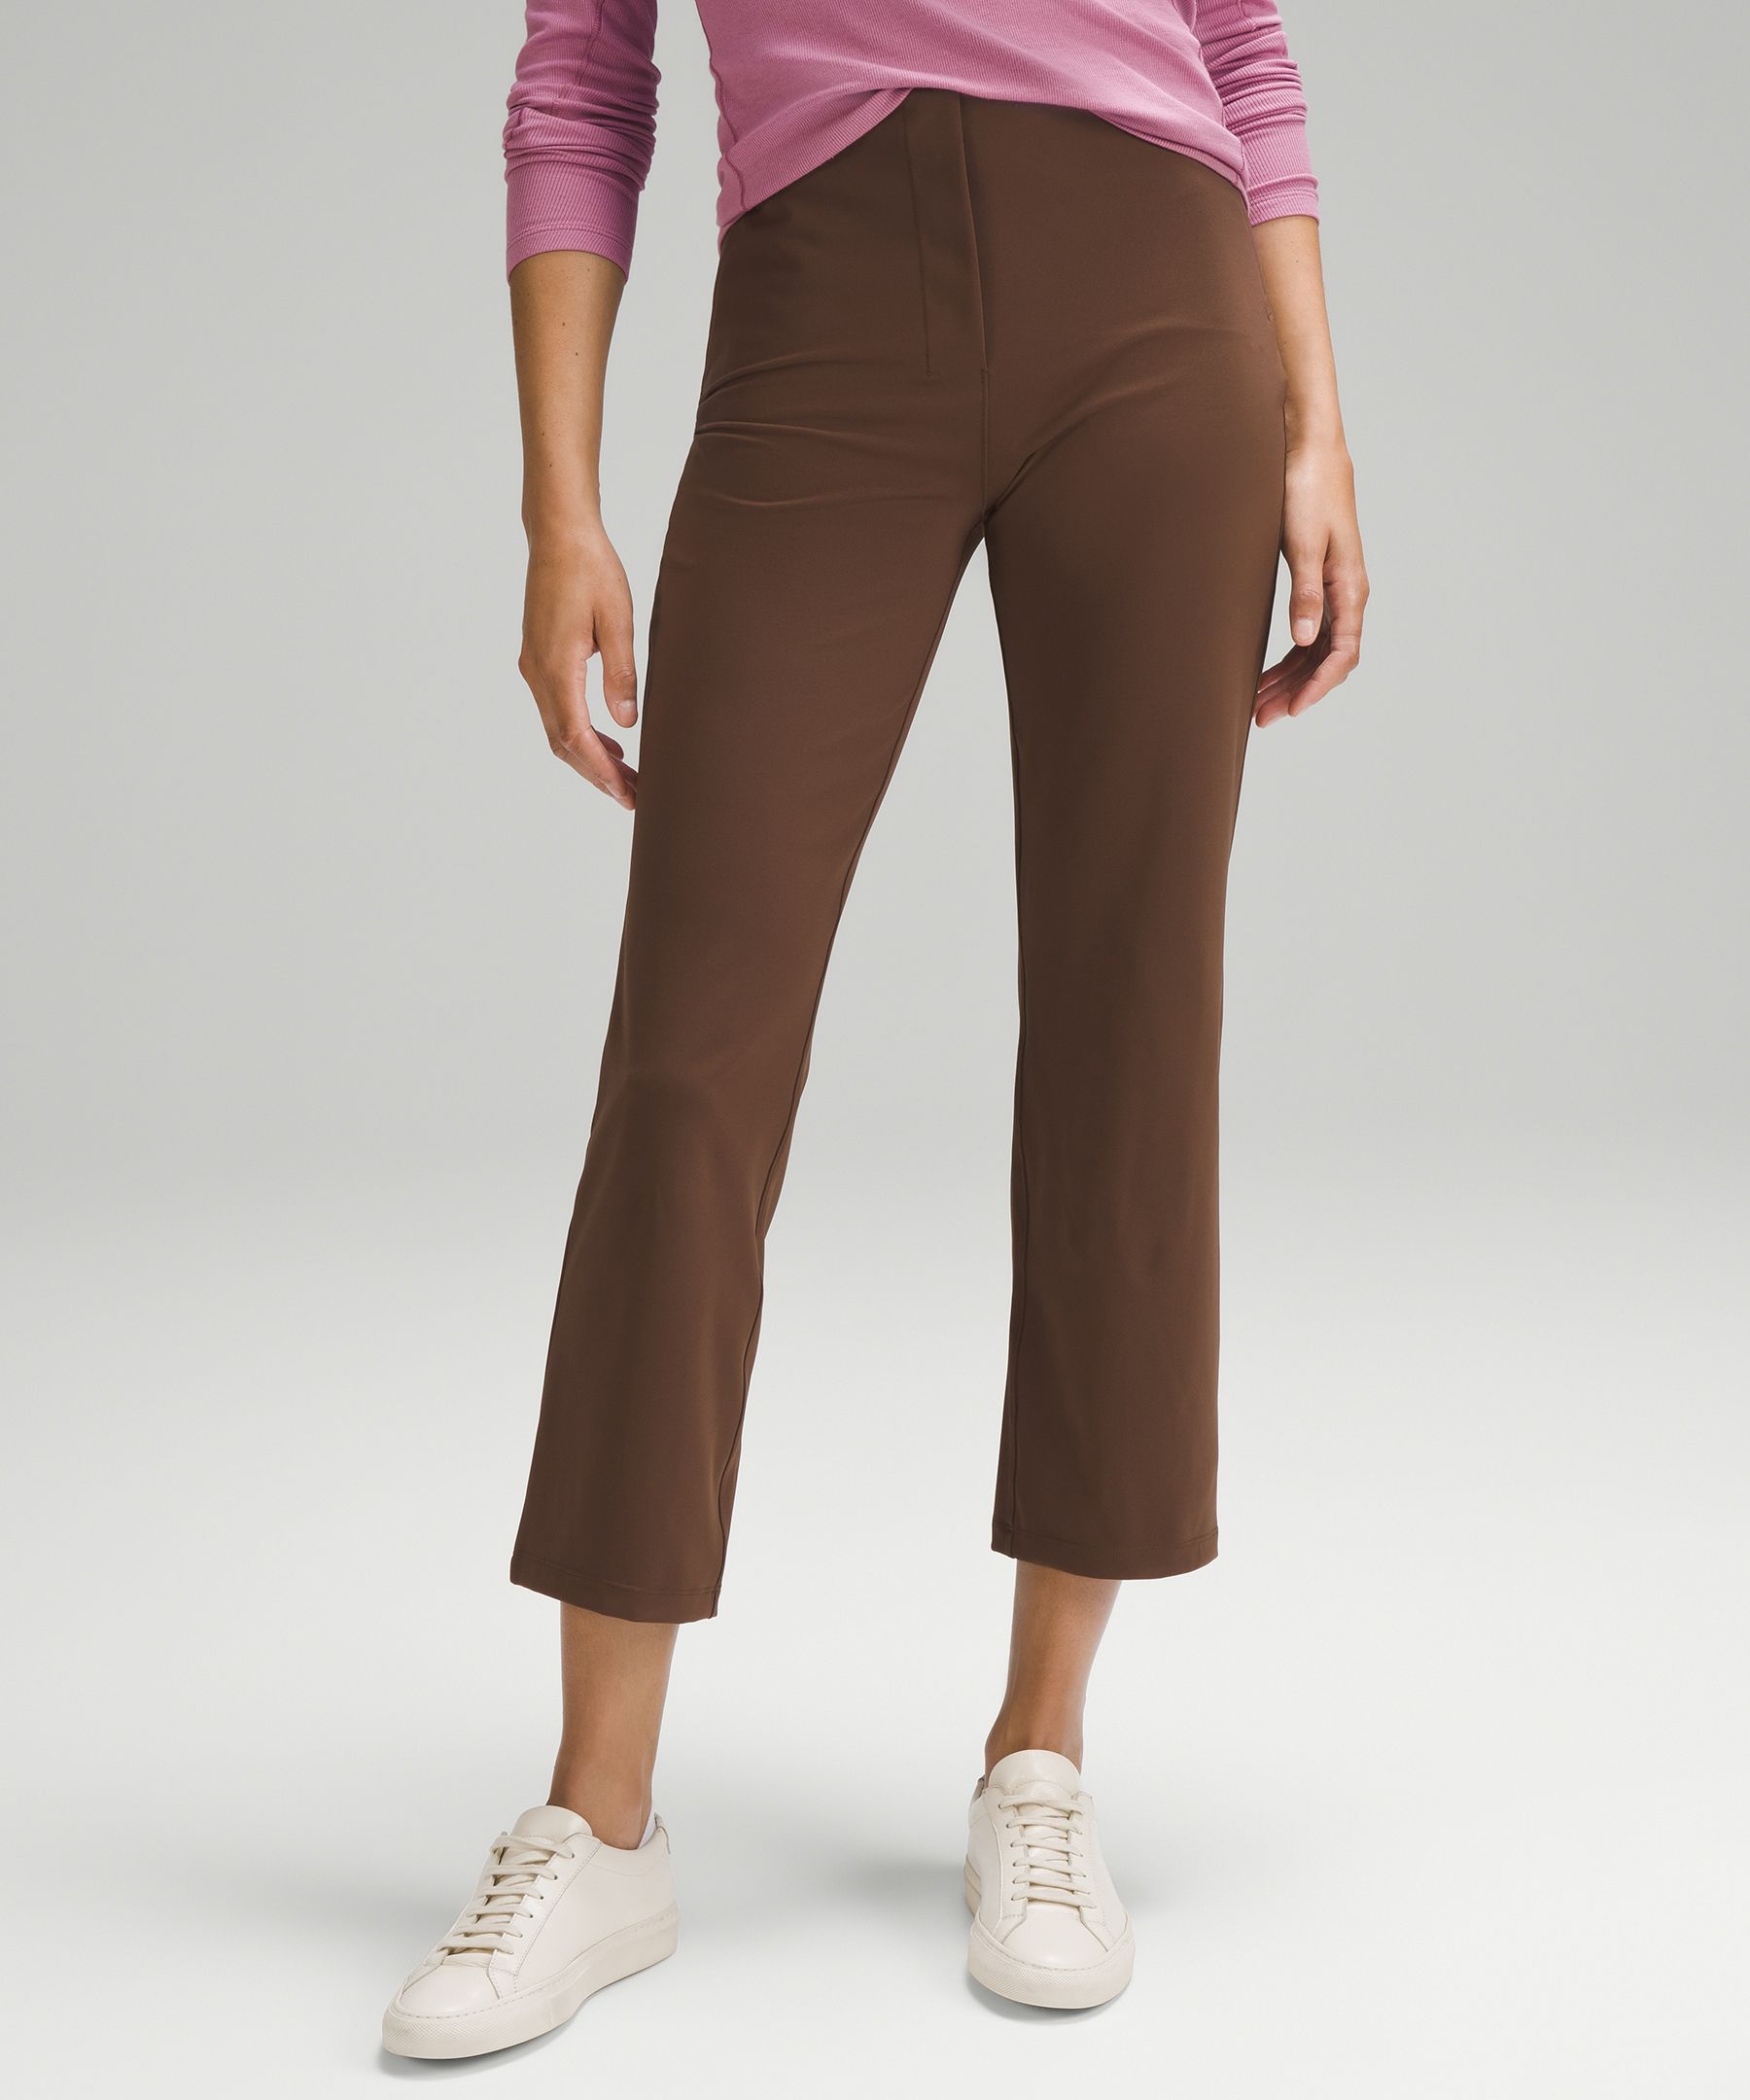 Smooth Fit Pull-On High-Rise Pant, Trousers